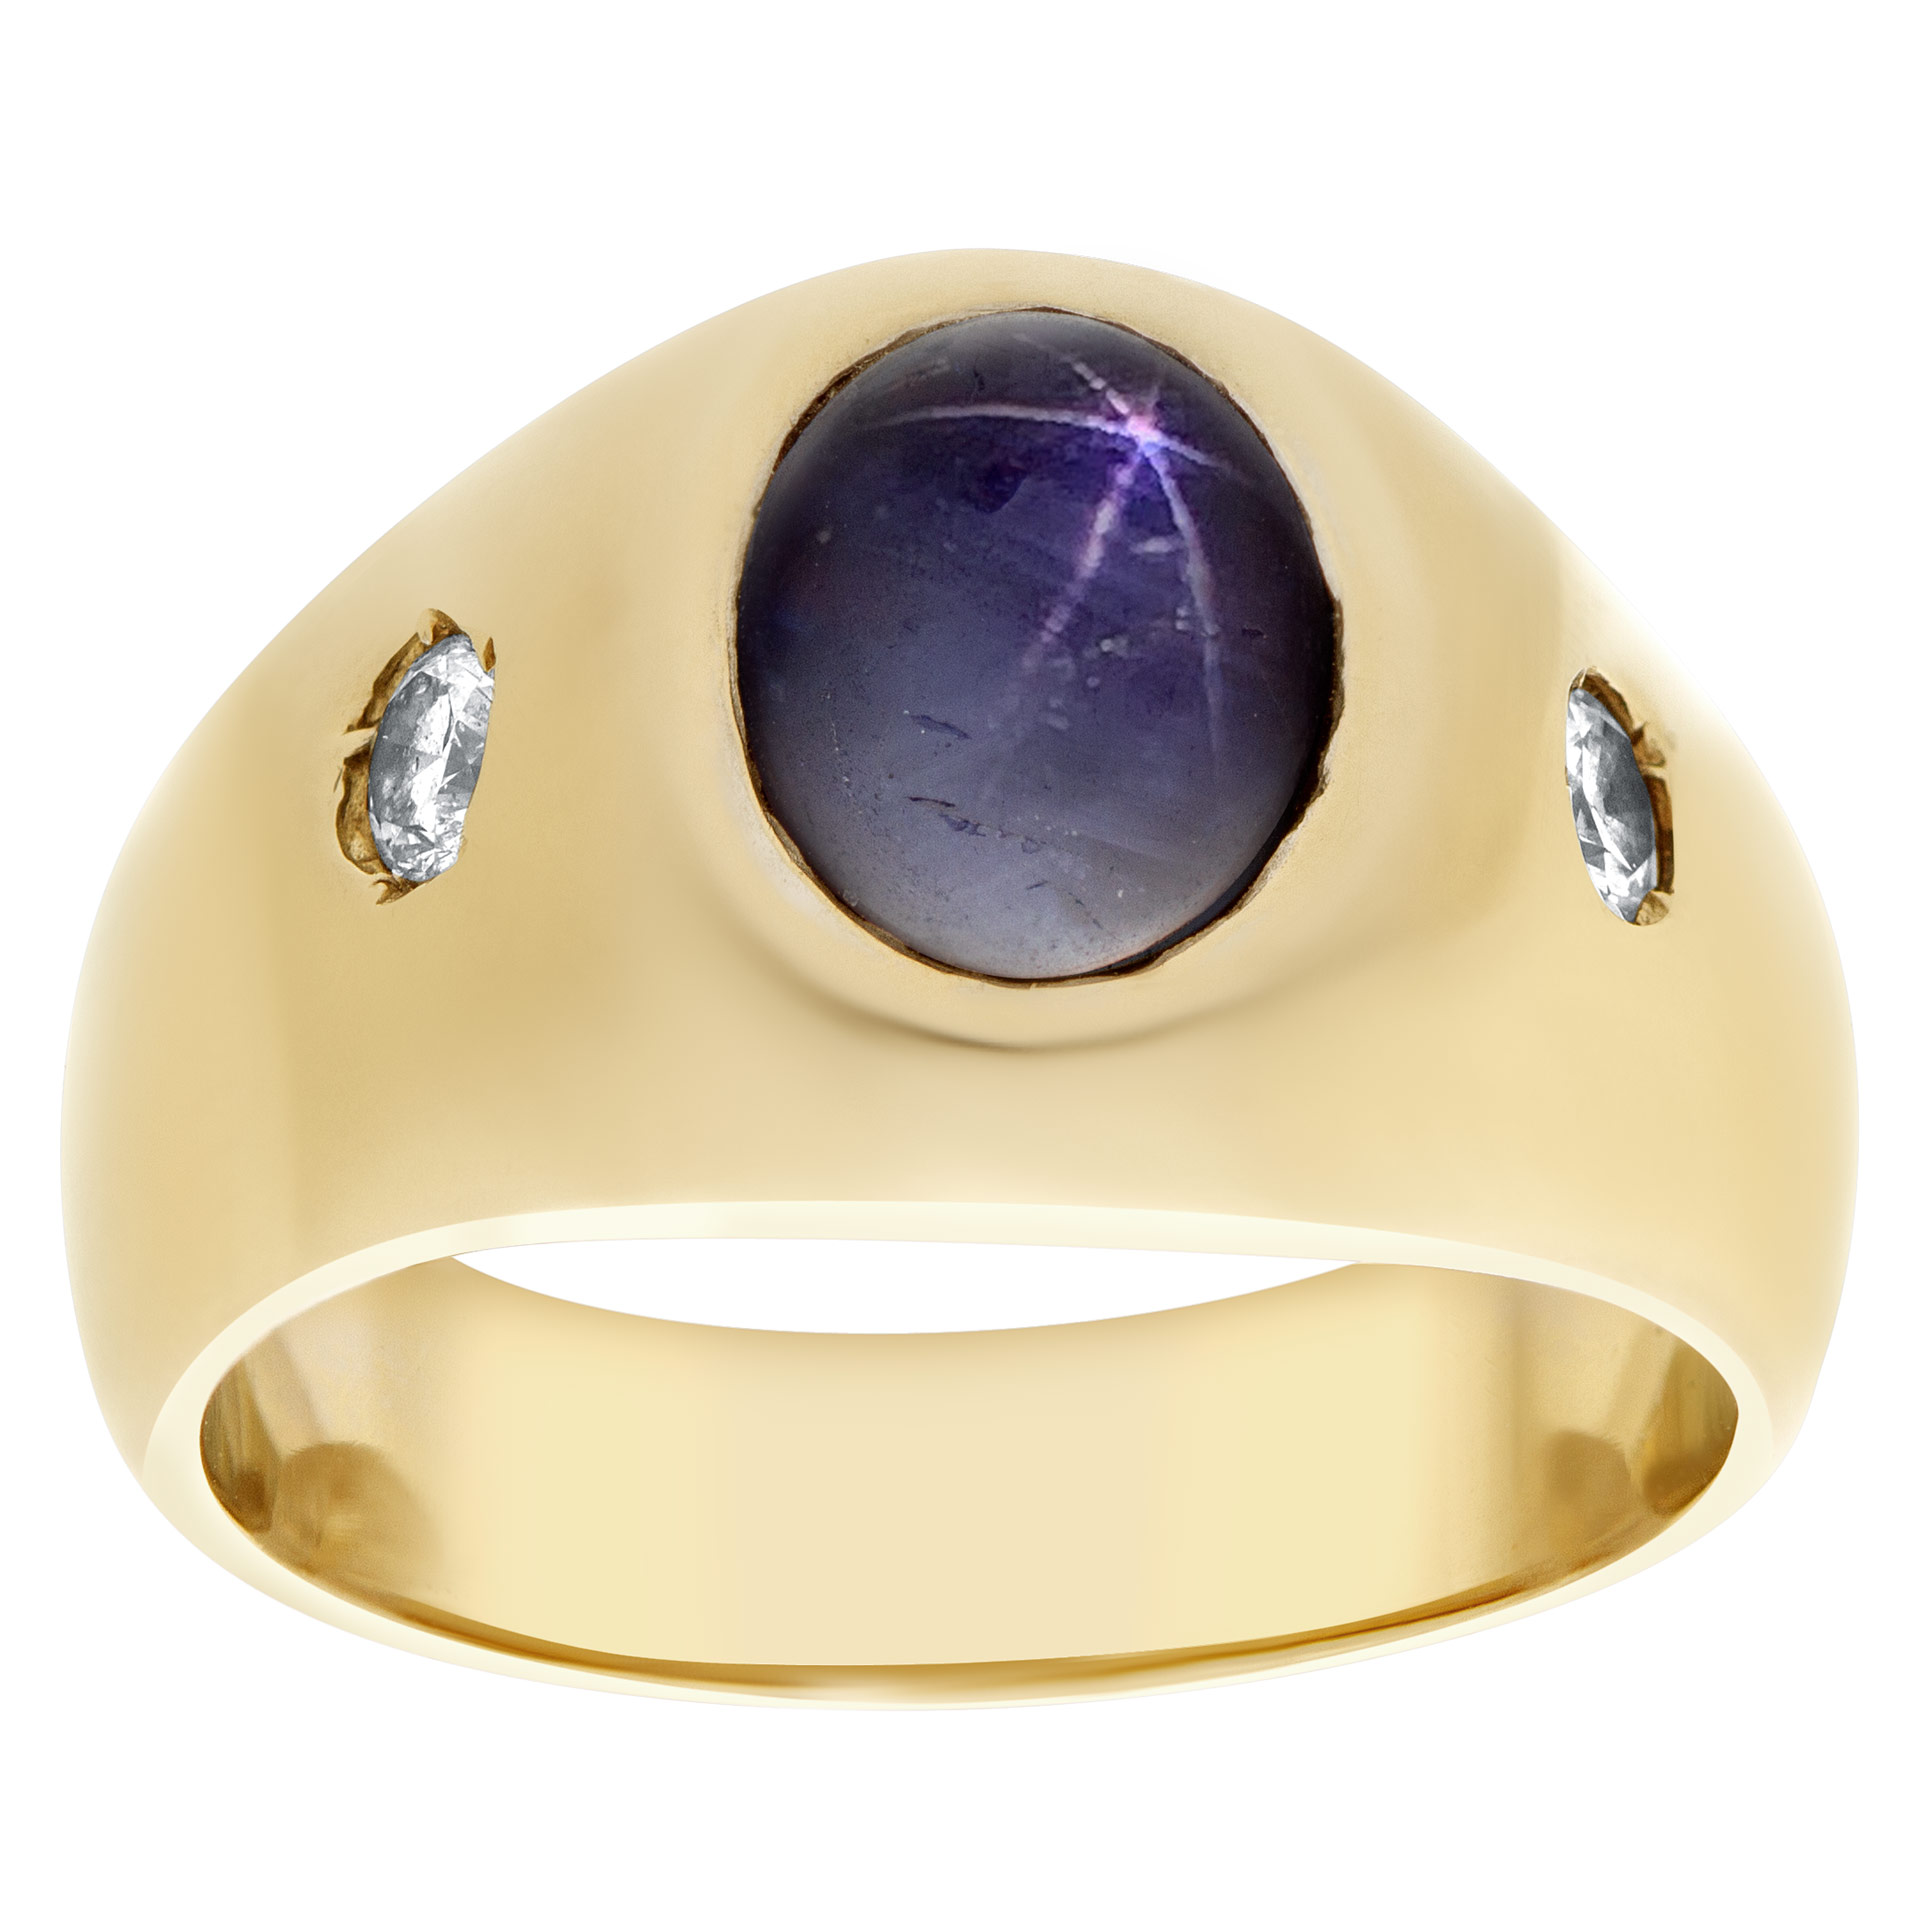 Star sapphire ring in 18k with two side diamond accents